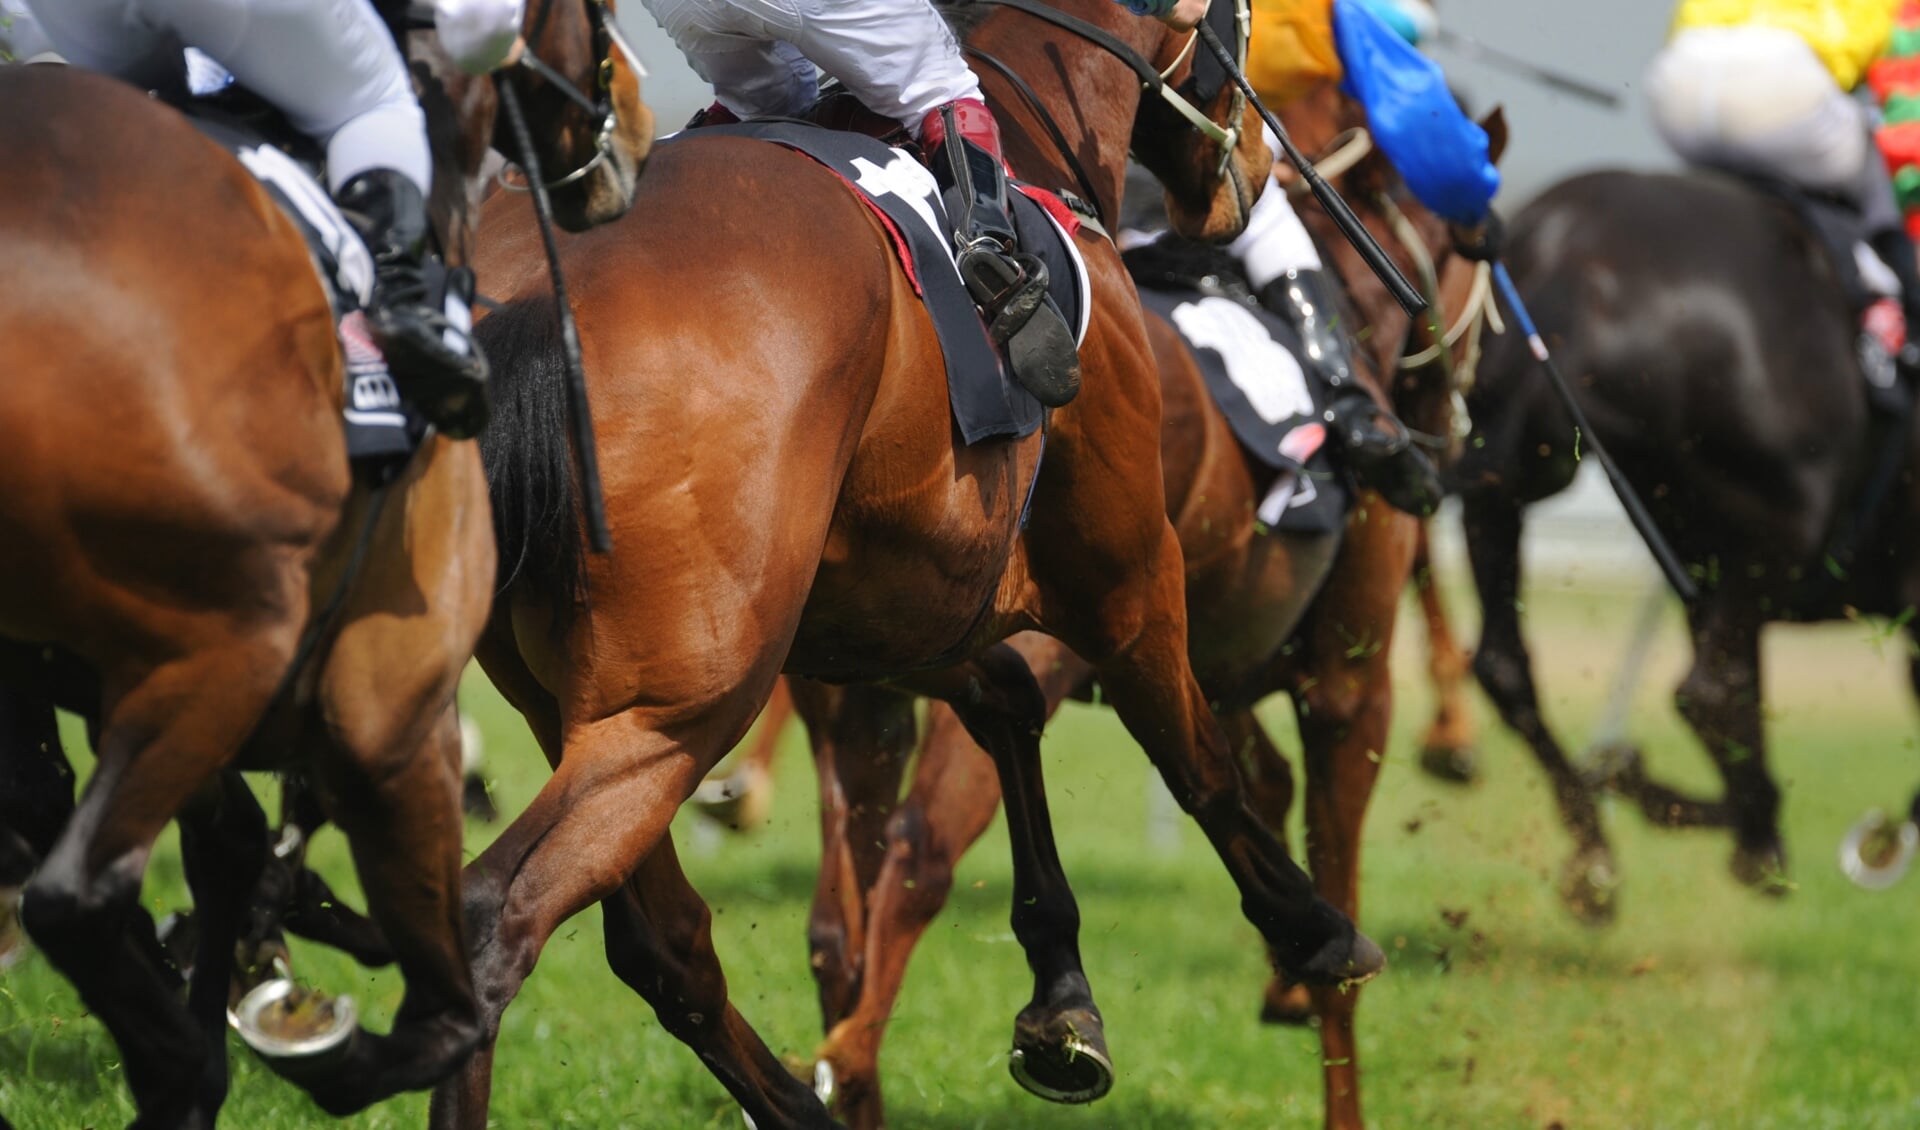 A field of horses and jockeys during a race.